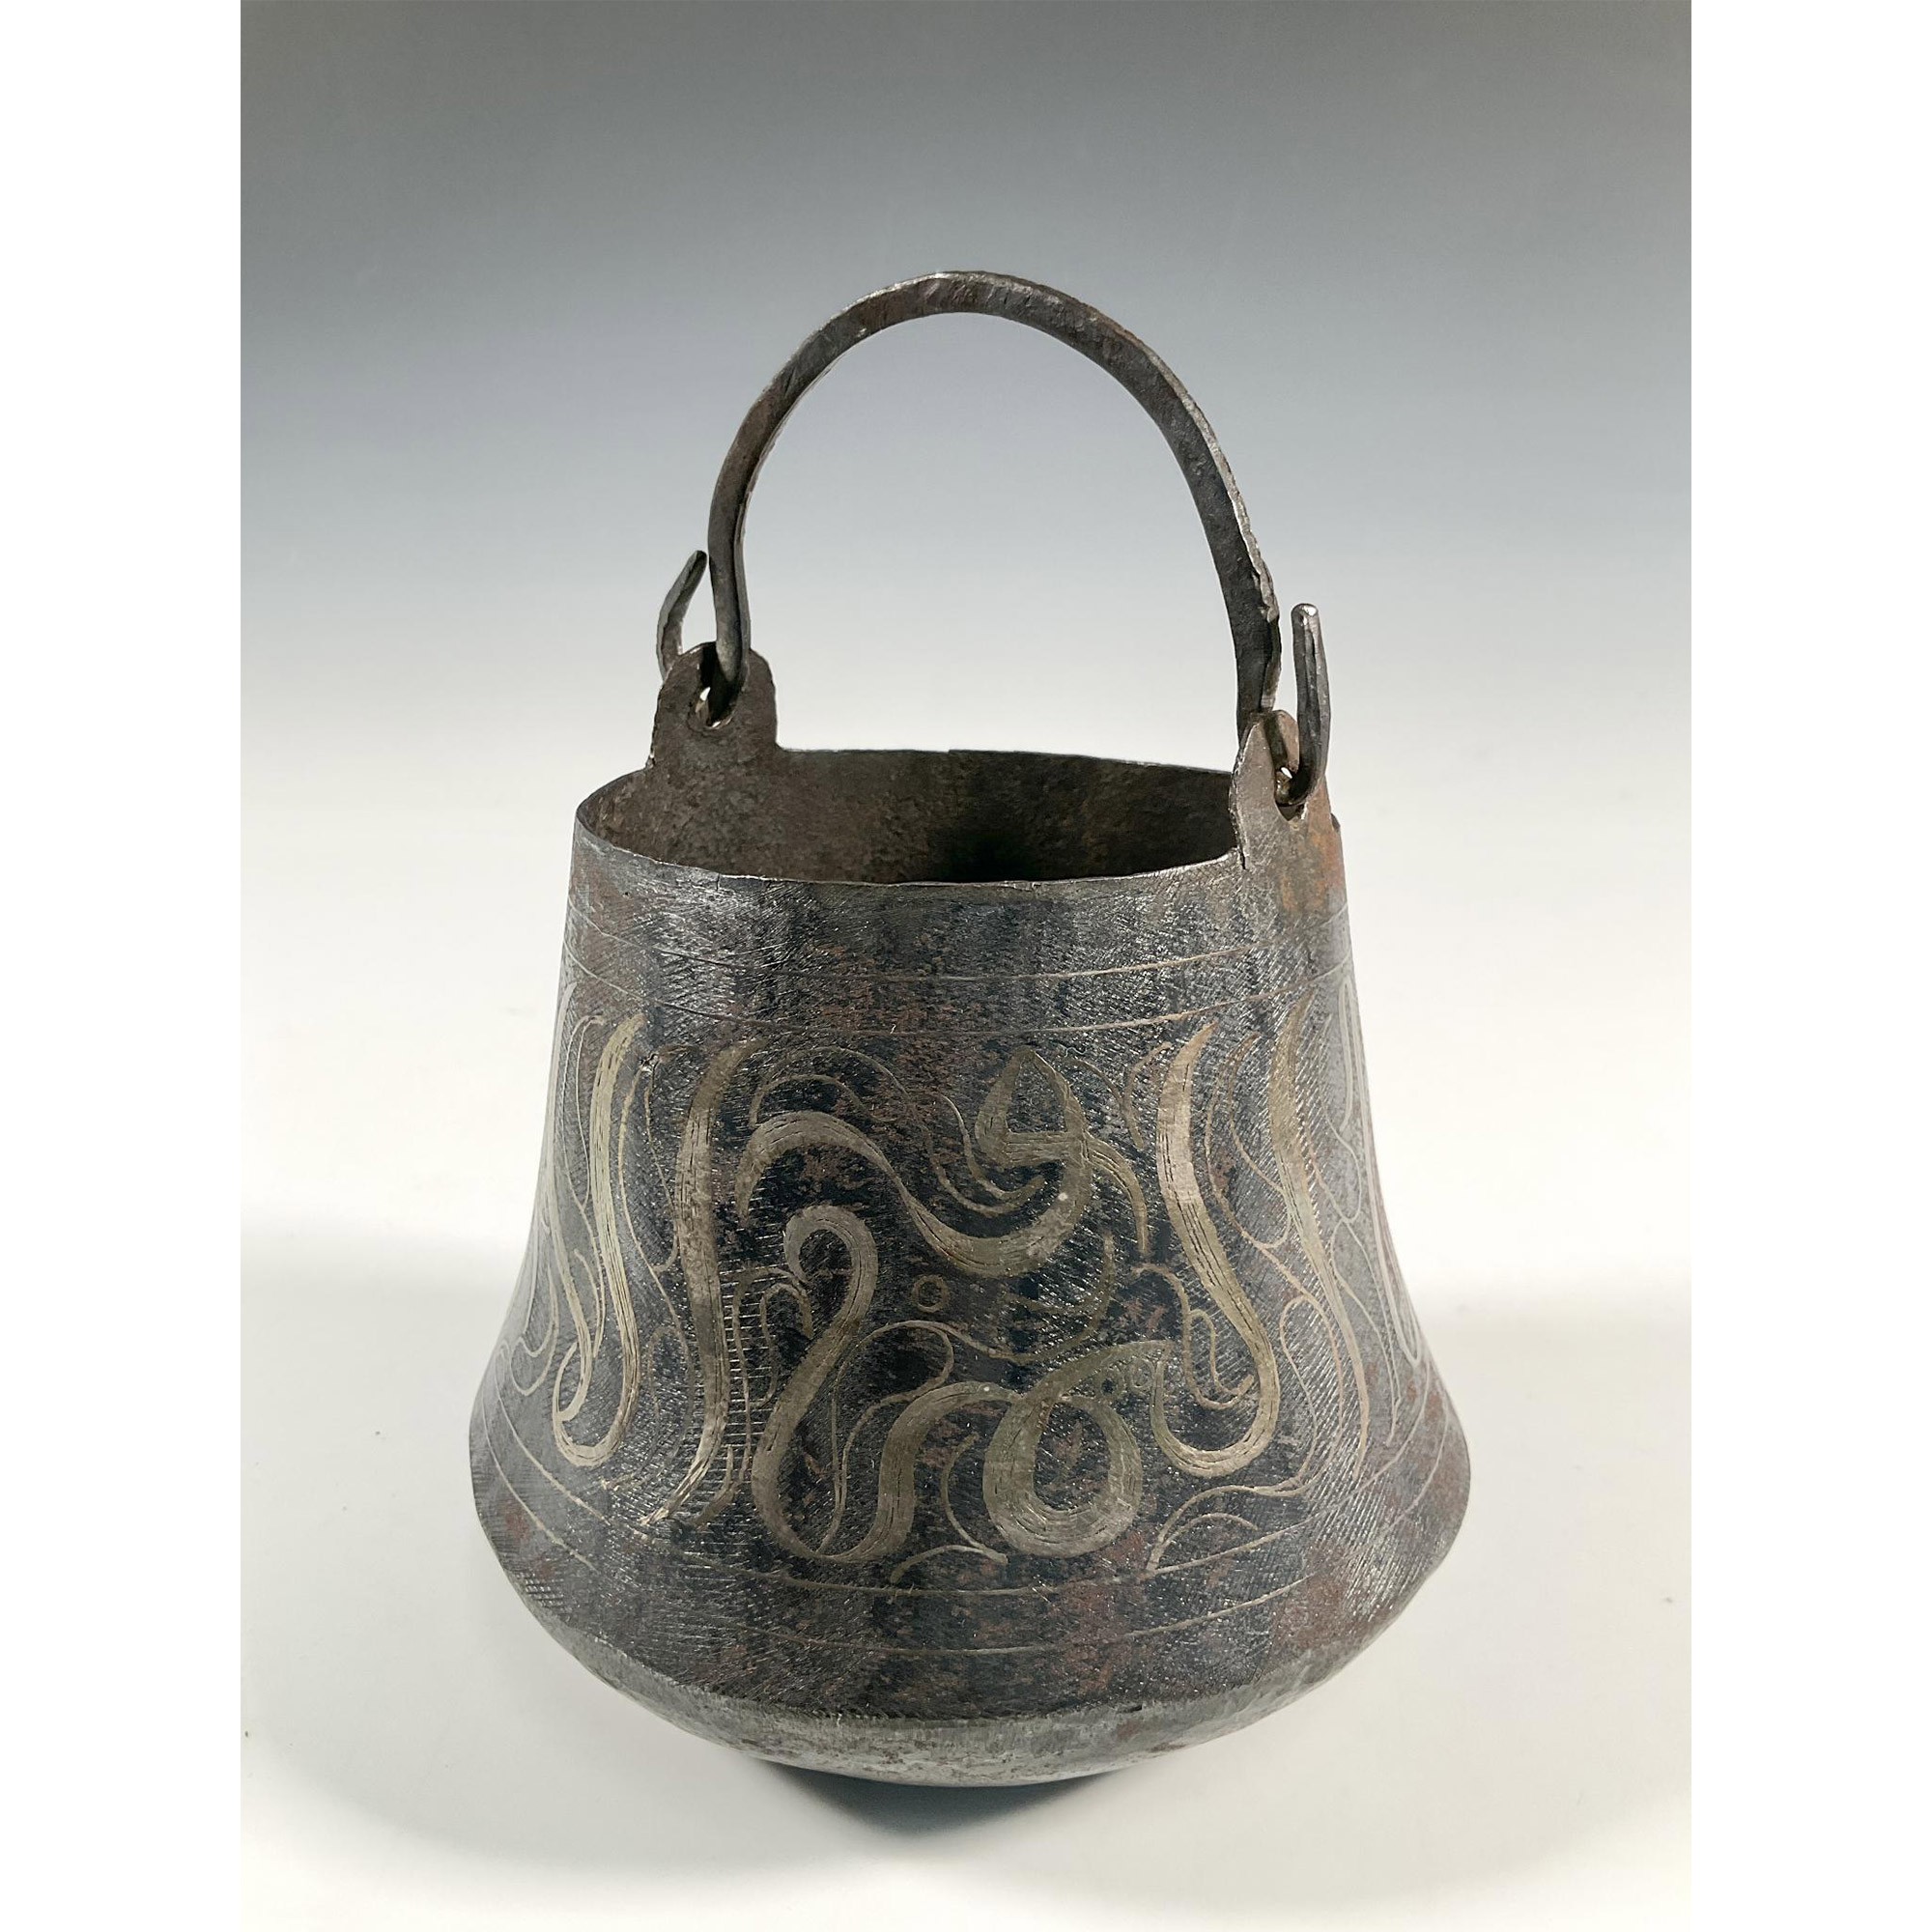 Islamic Iron Vessel With Inlay Silver Calligraphy - Image 2 of 3